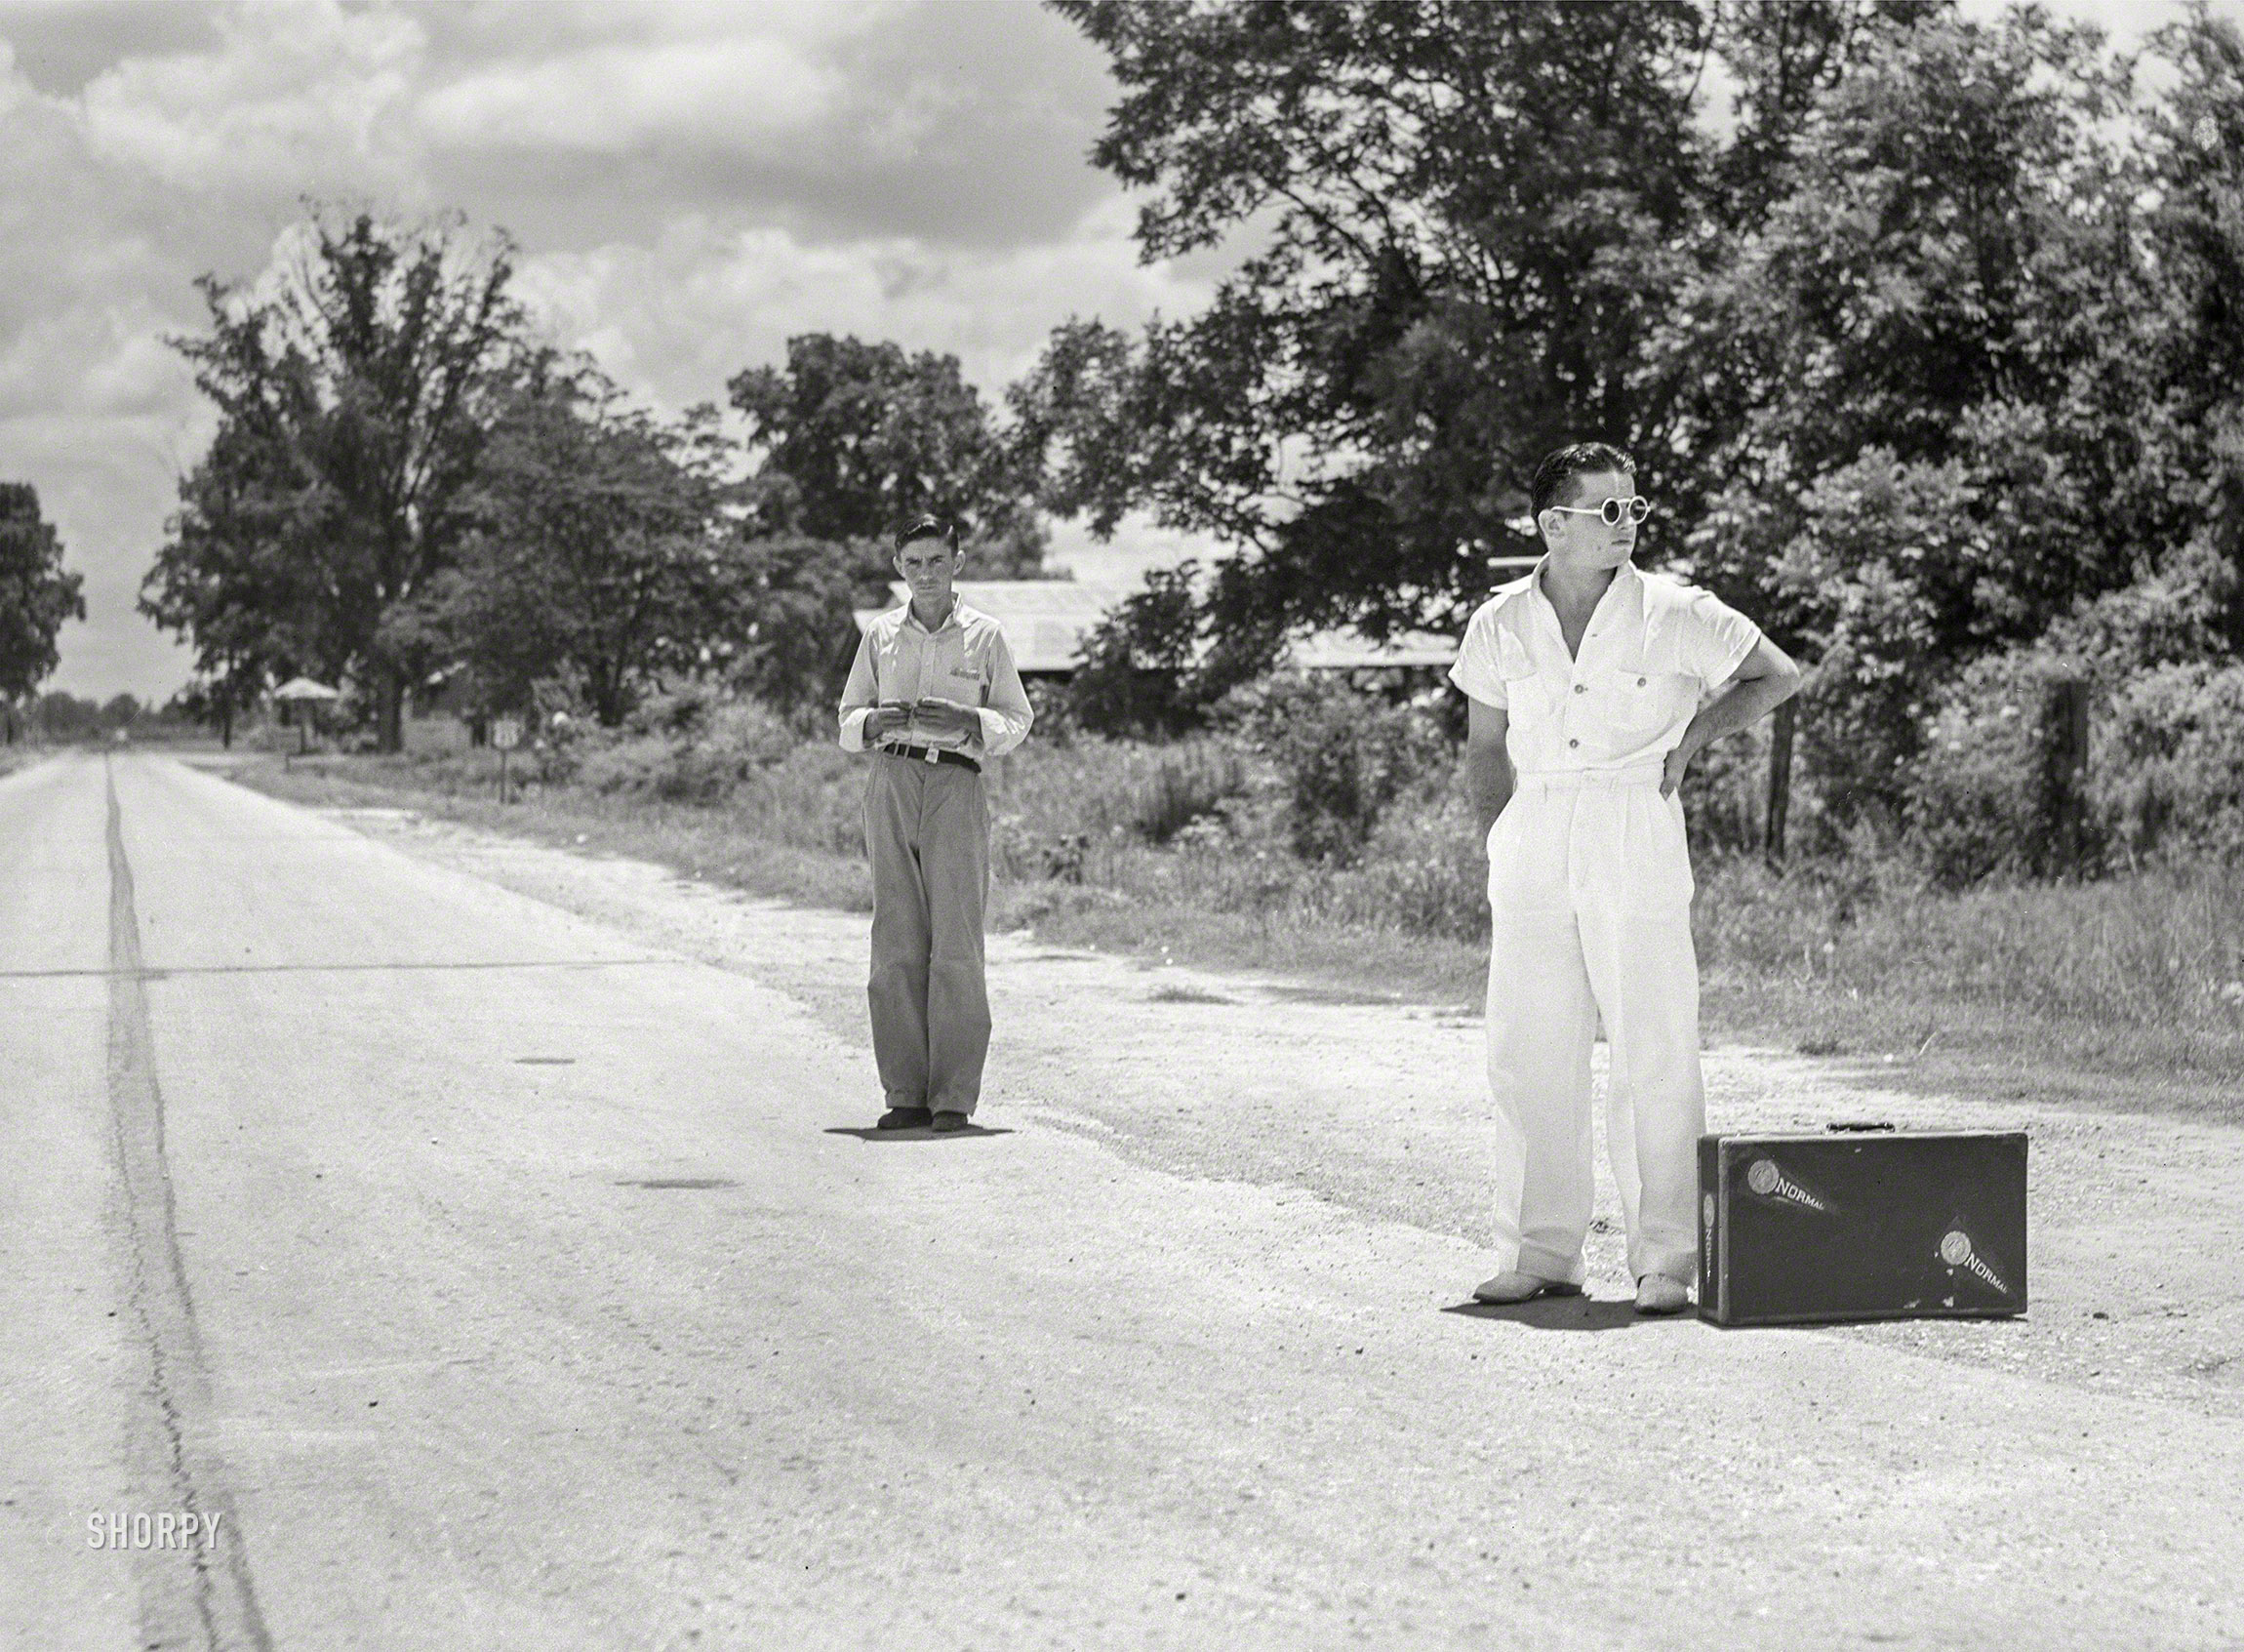 June 1940. "College boy trying to 'thumb' a ride home over the weekend near Natchitoches, Louisiana." Photo by Marion Post Wolcott for the Farm Security Administration. View full size.